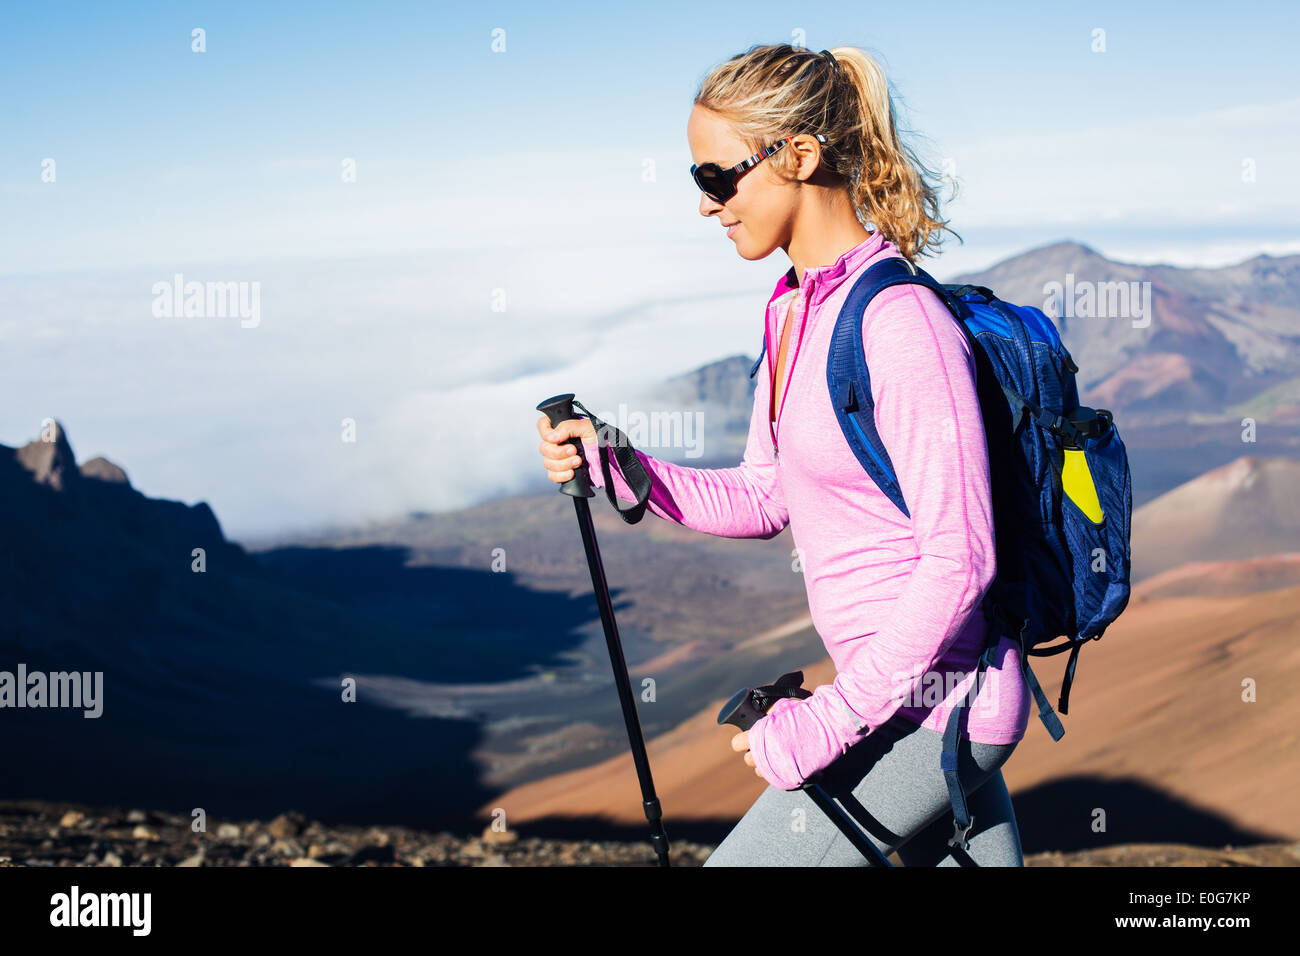 Woman hiking on beautiful mountain trail. Trekking and backpacking in the mountains. Healthy lifestyle outdoor adventure concept Stock Photo